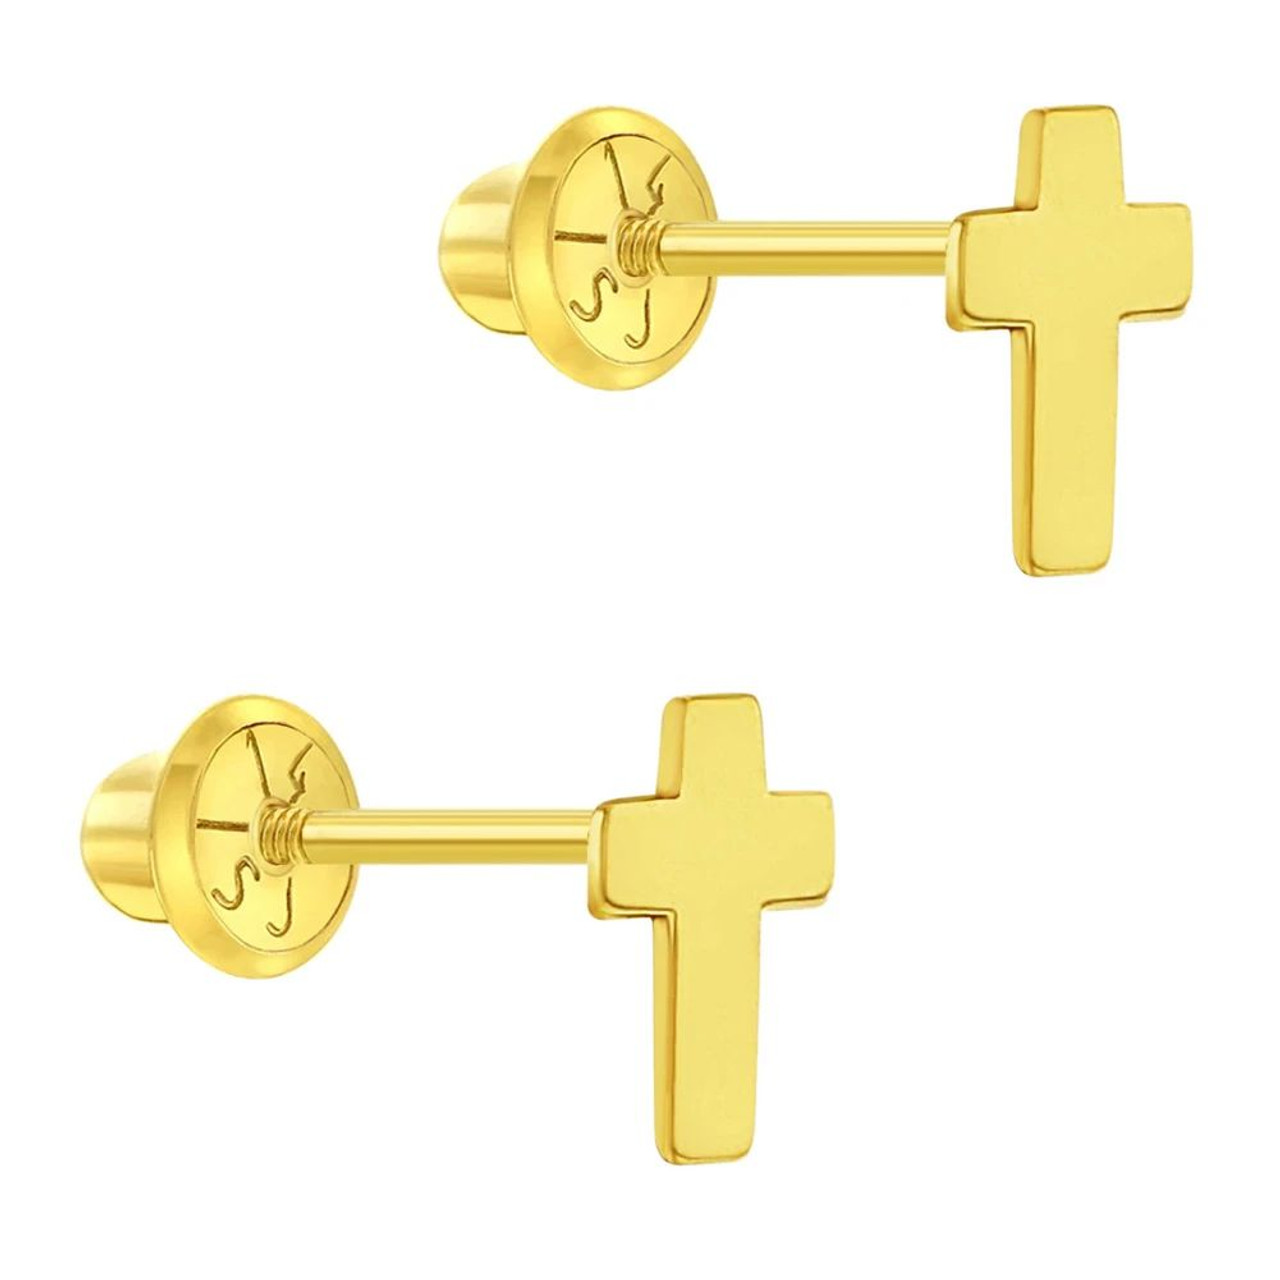 Open Heart Crystal Cross Baby Earrings in 14k Yellow Gold with Safety Backs